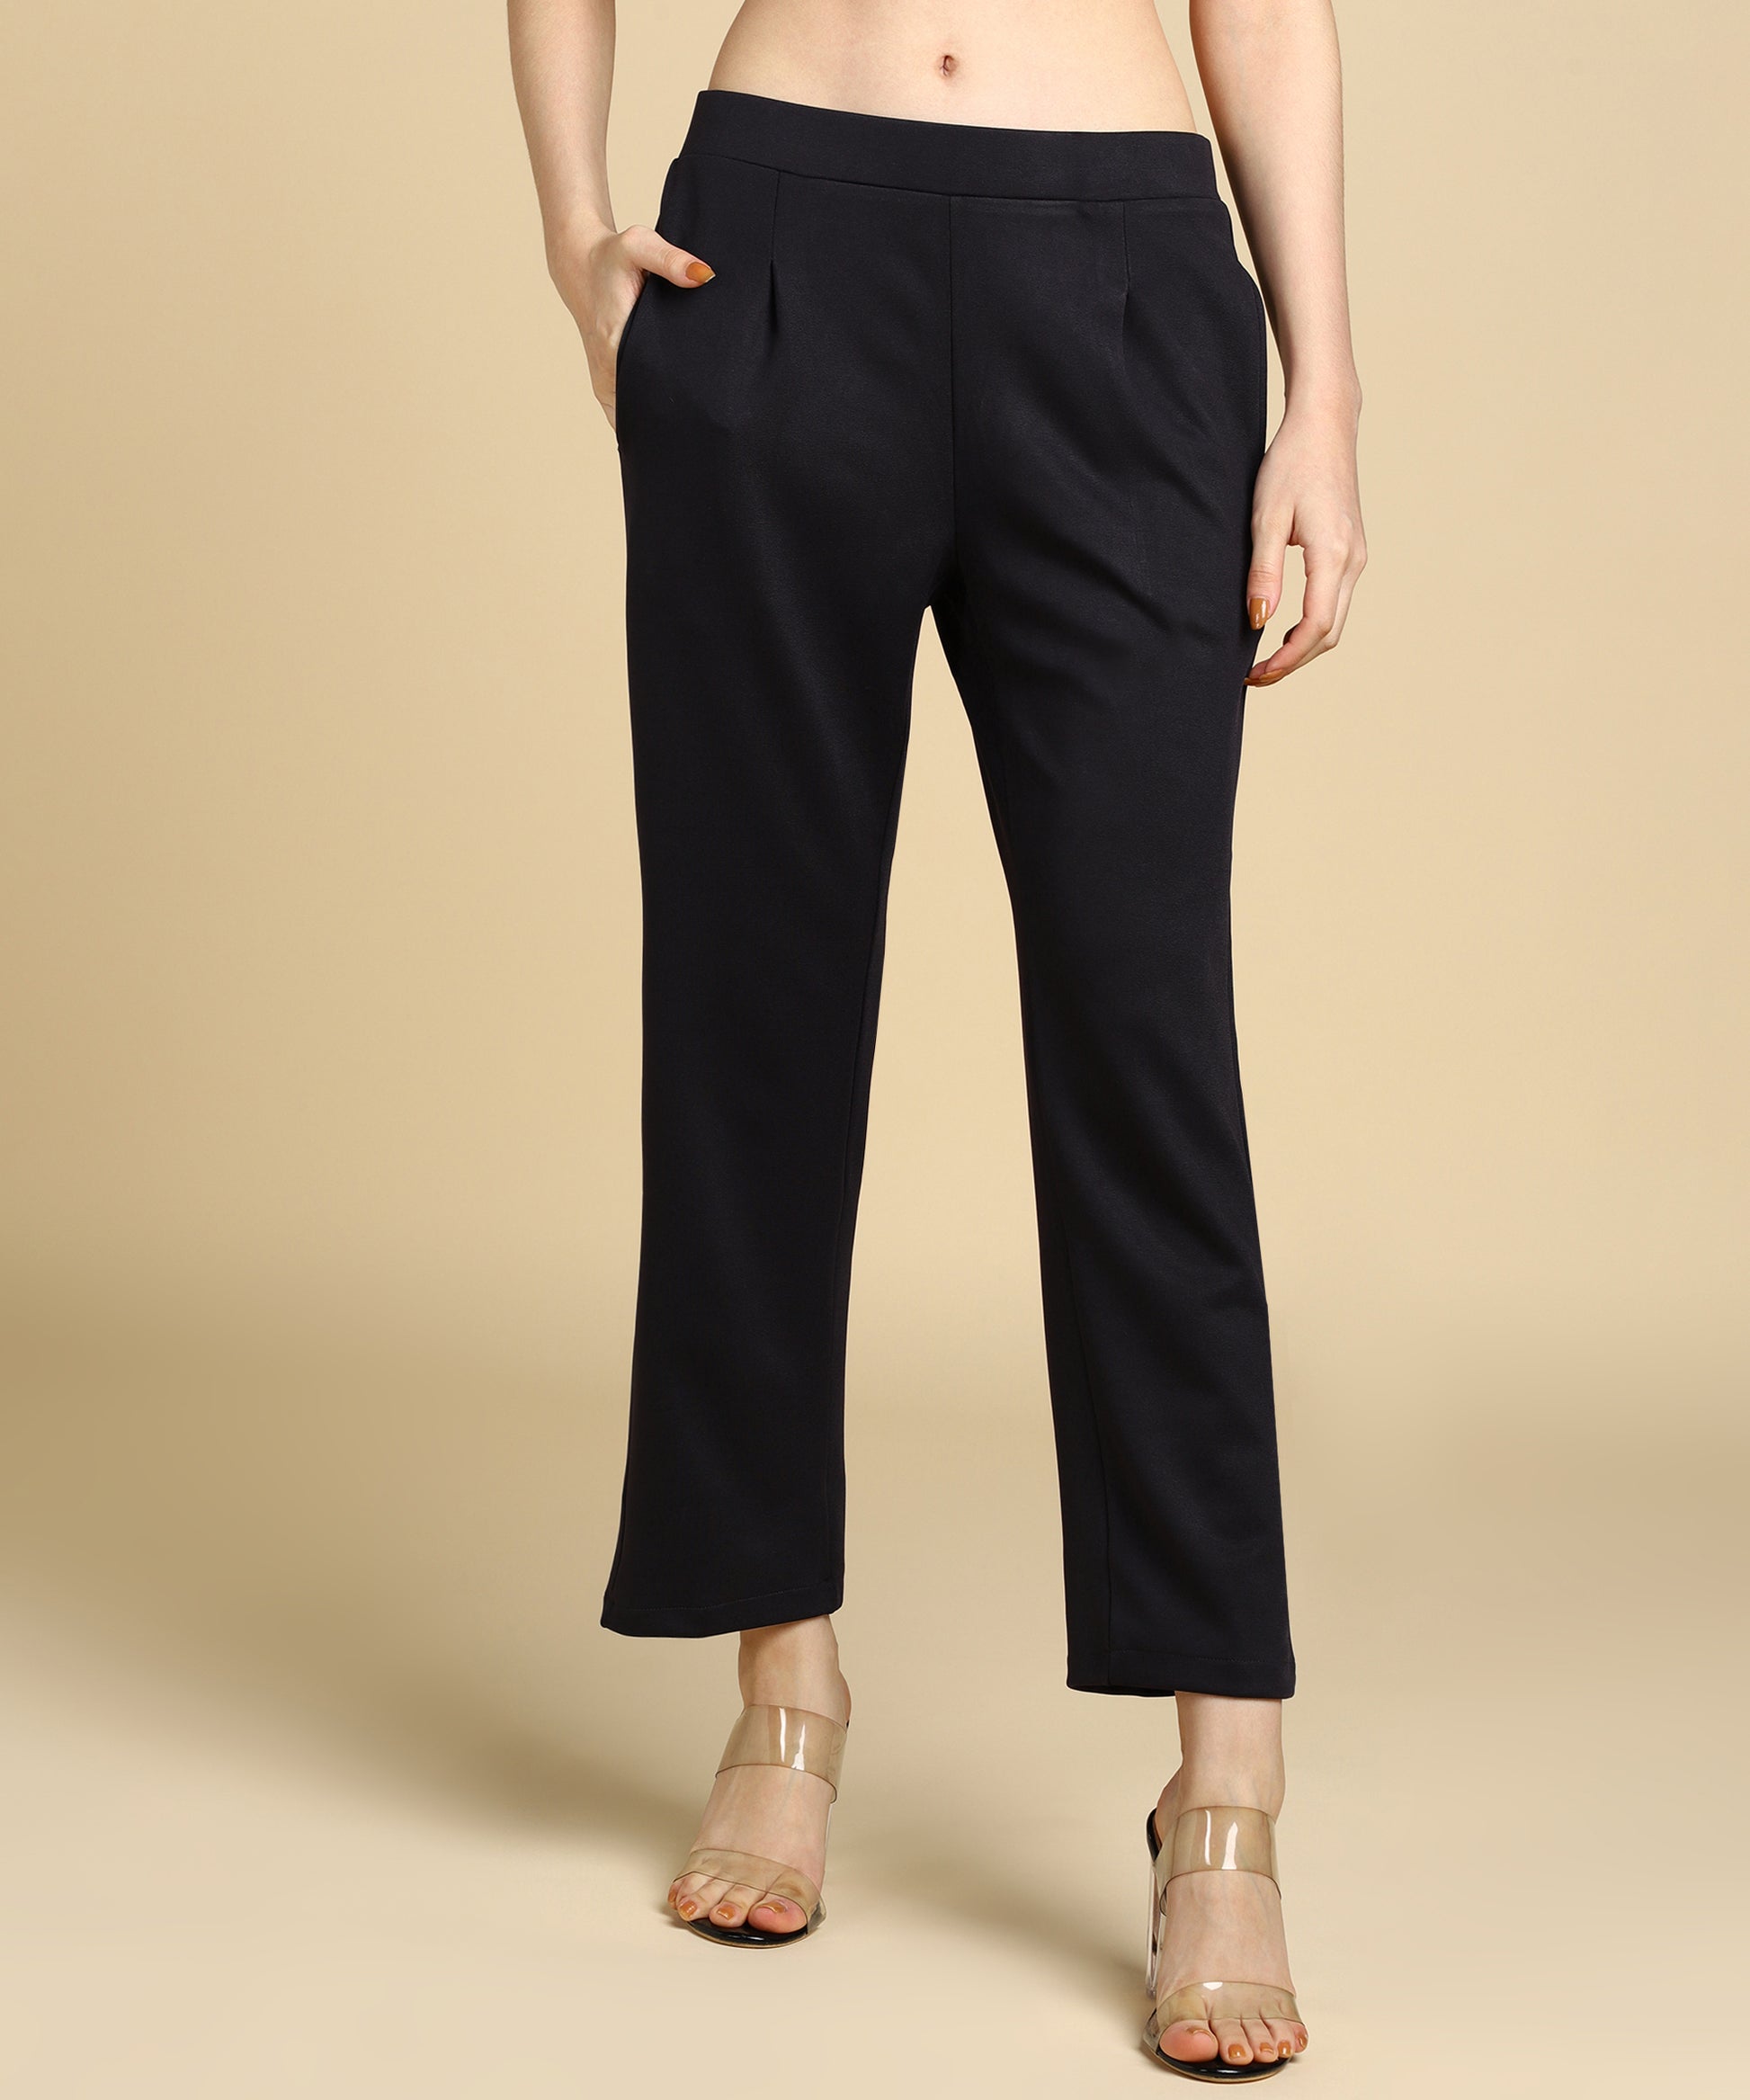 Women's High Waist Formal Stretchable Relaxed Parallel Trouser